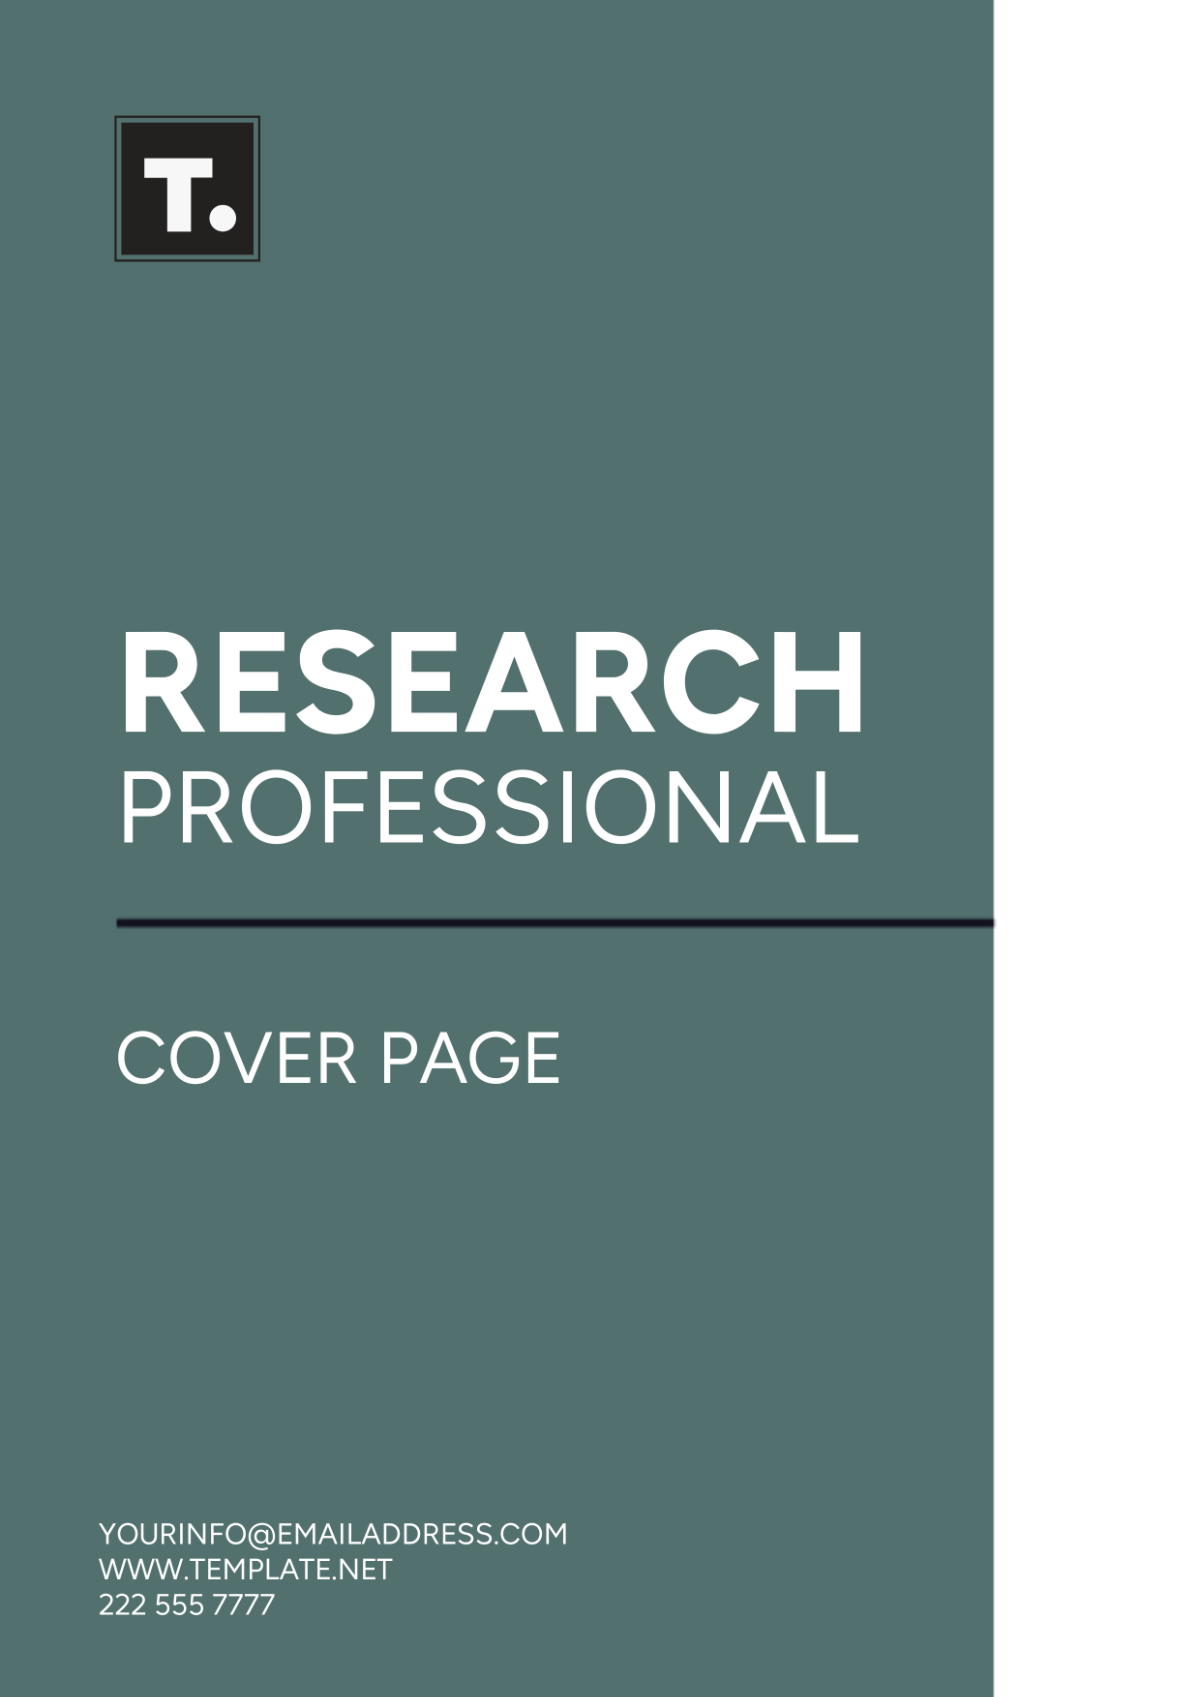 Research Professional Cover Page